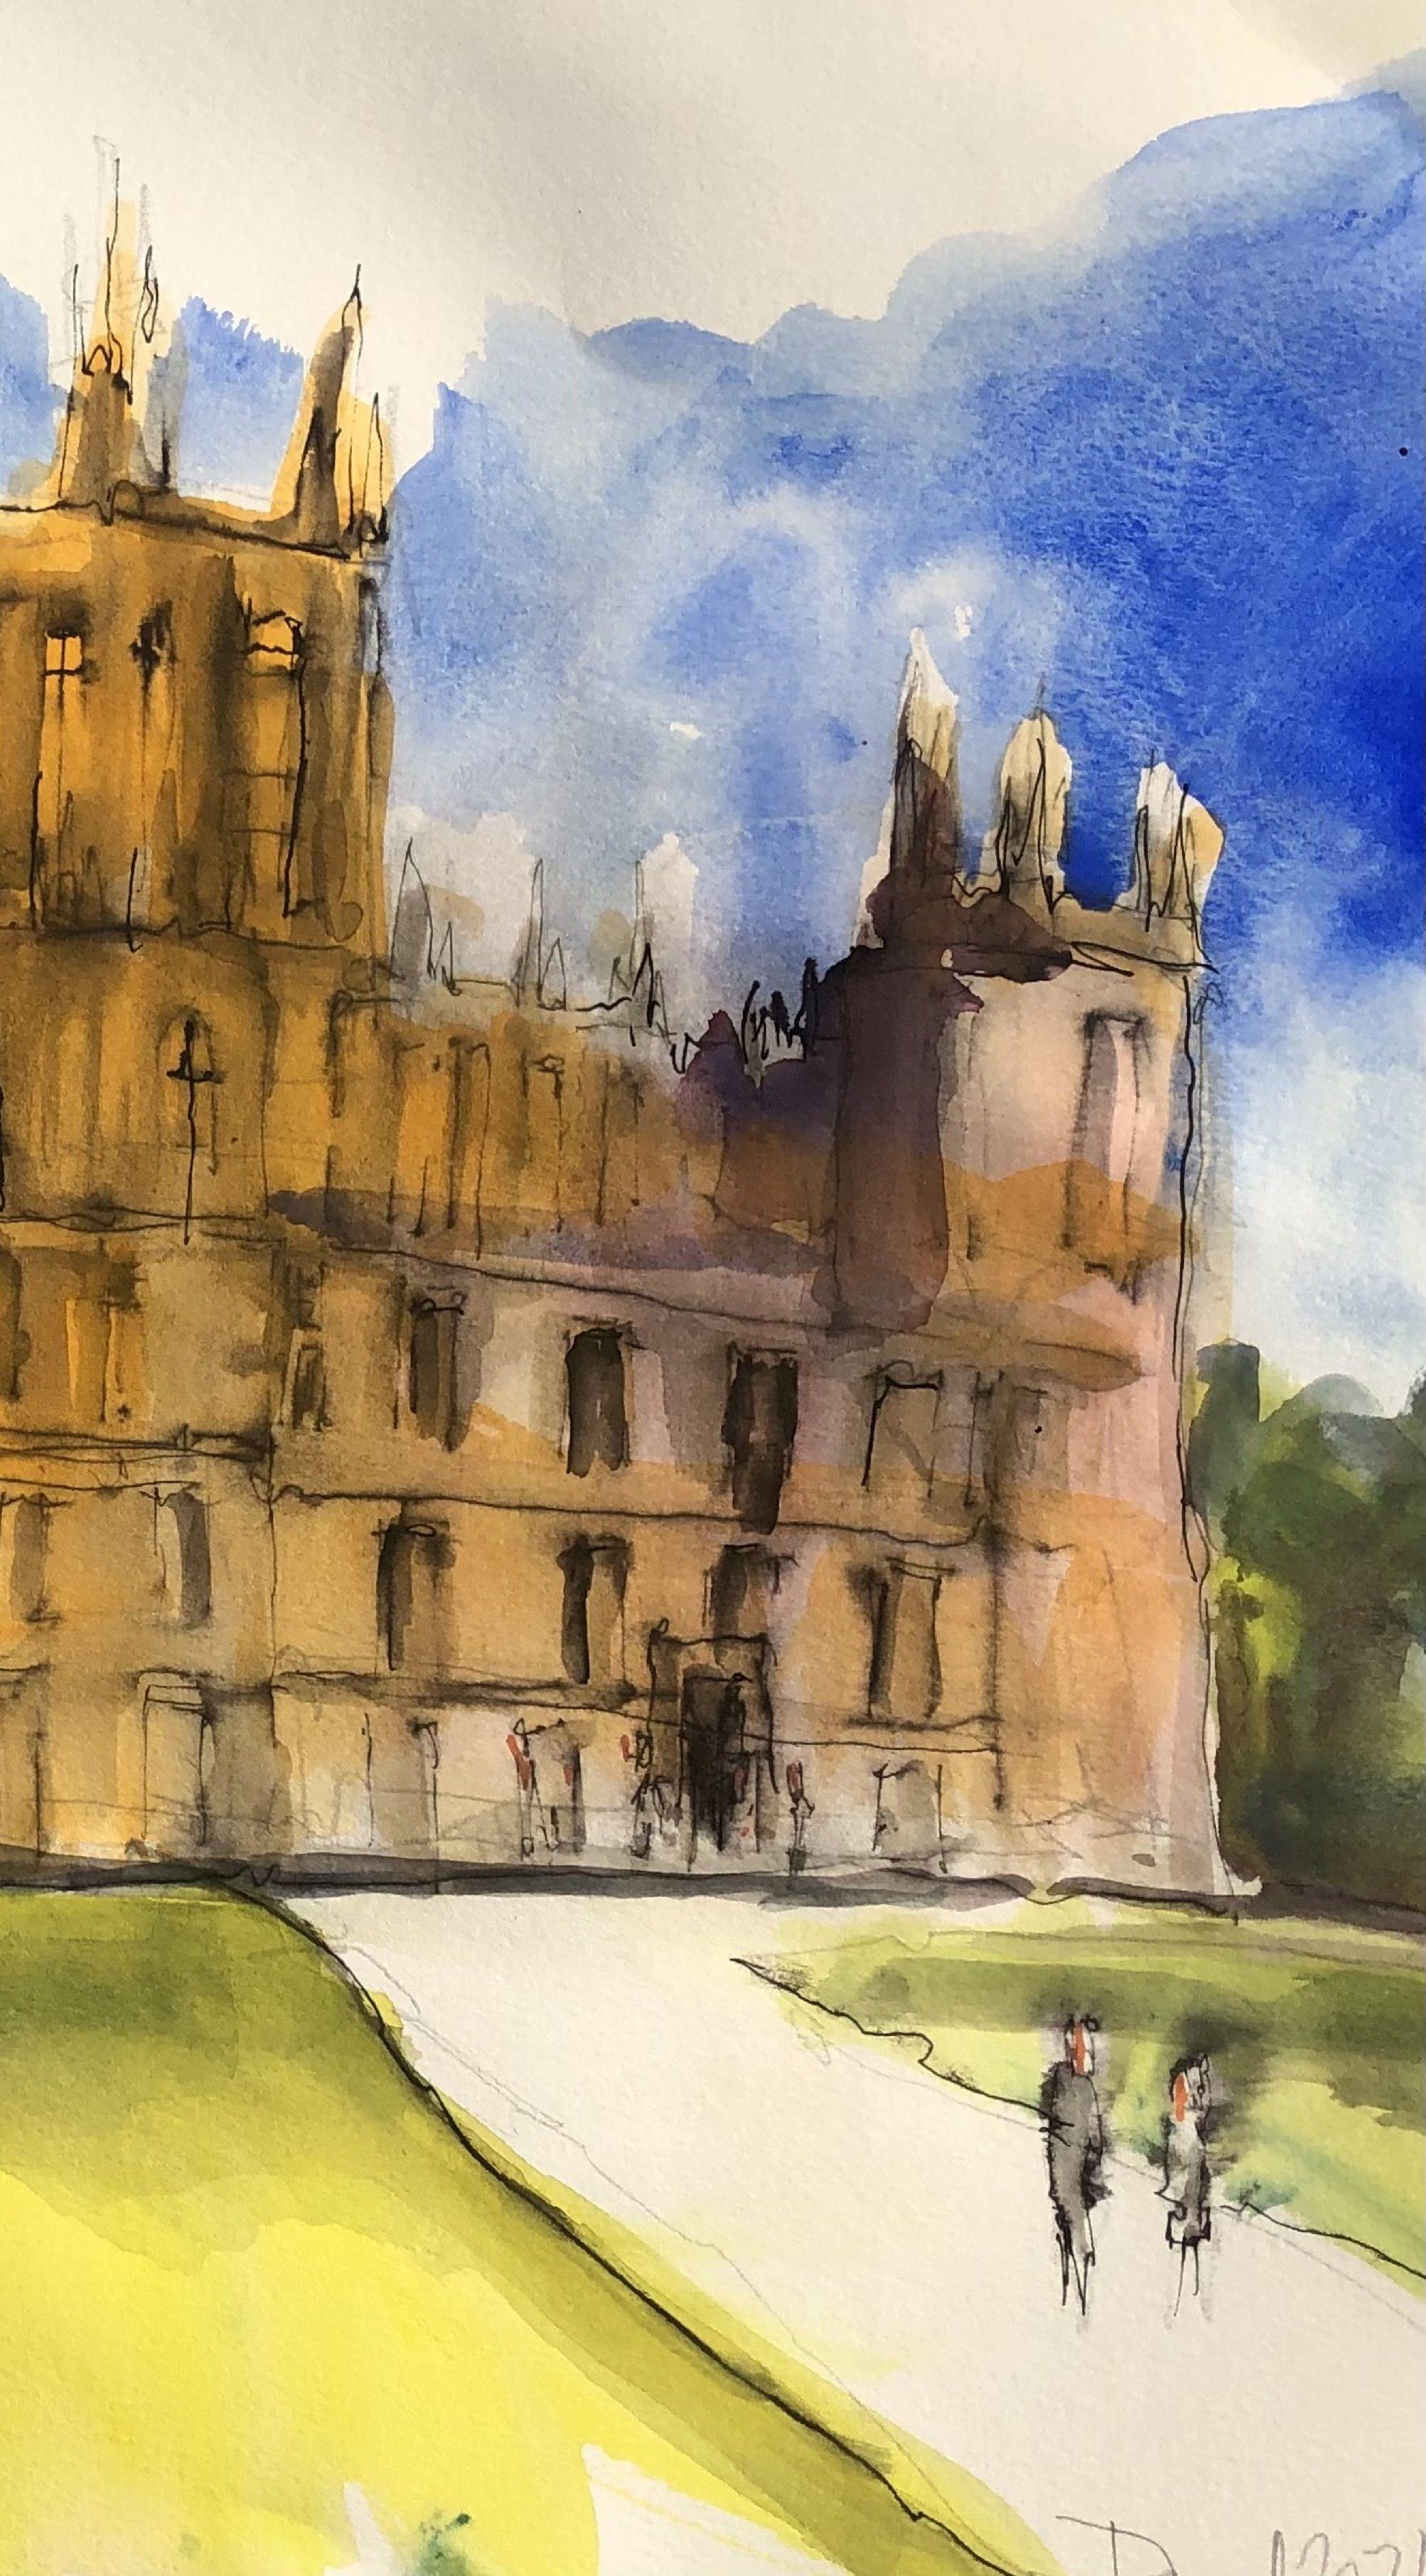 Downton Abbey North View, Painting, Watercolor on Watercolor Paper - Art by Daniel Clarke